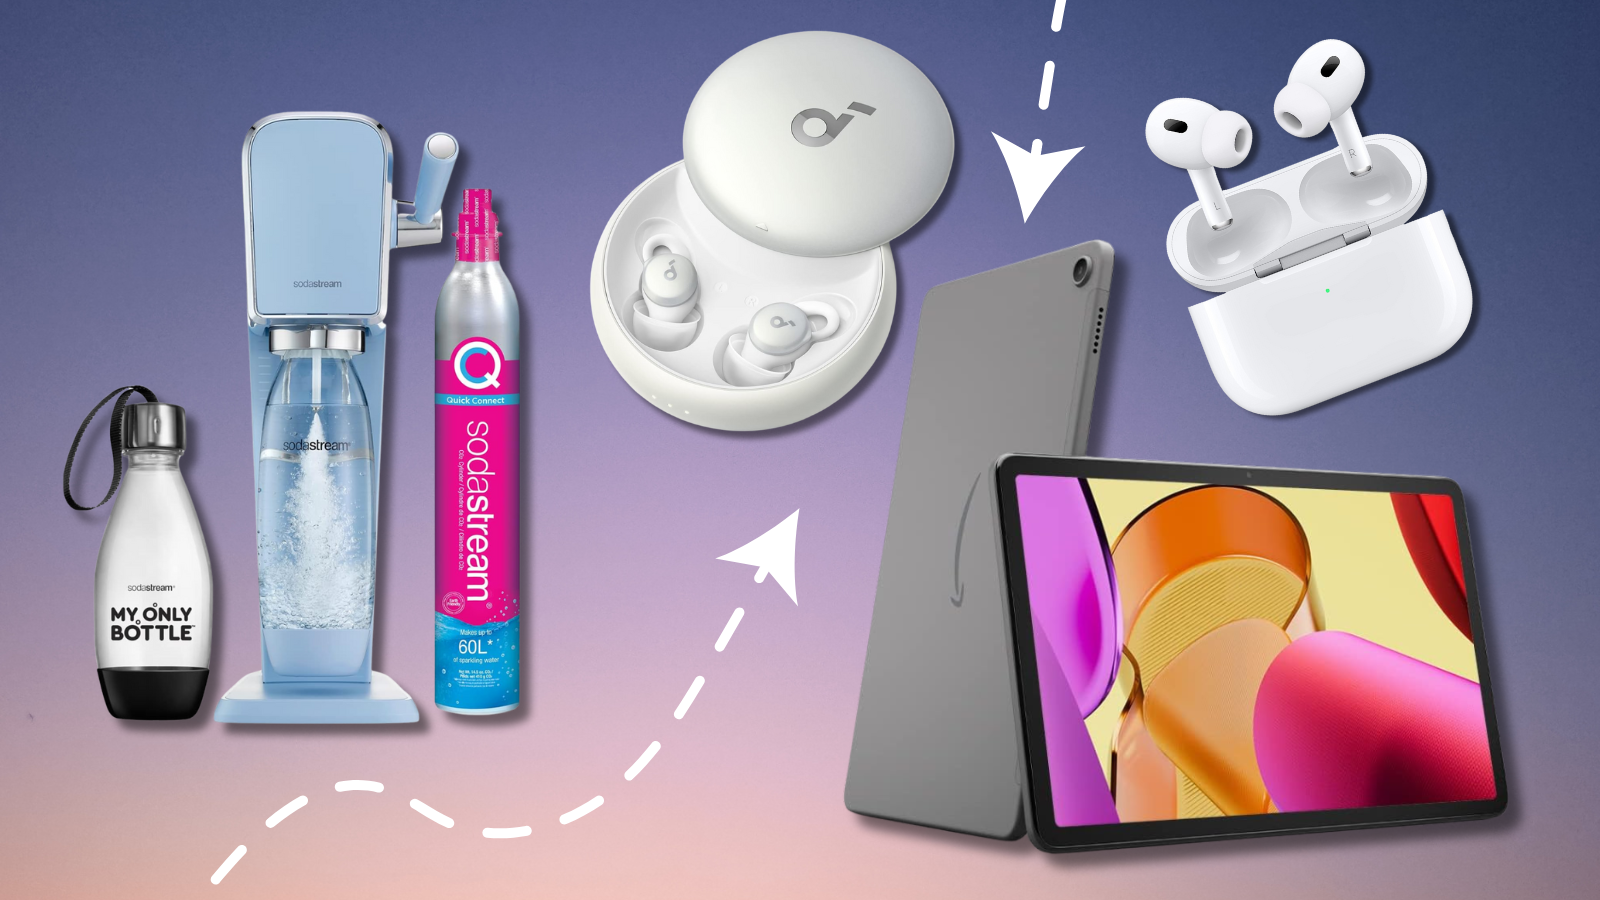 SodaStream Art, Soundcore Sleep earbuds, AirPods Pro, and Amazon Fire tablet with purple and pink gradient background